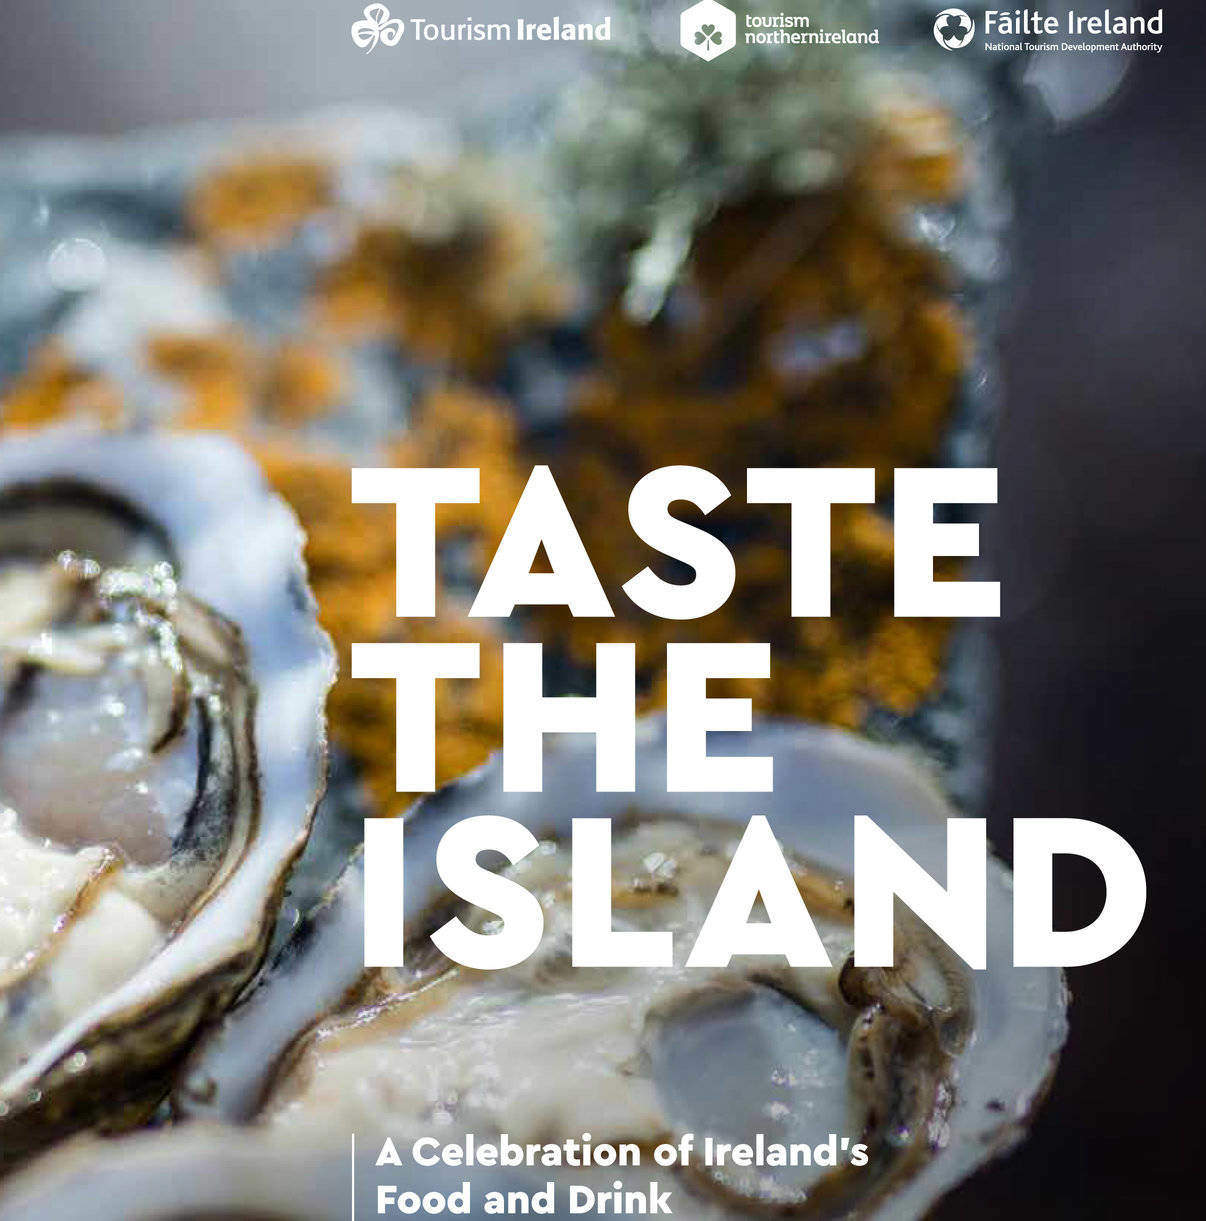 The new initiative has been developed by Fáilte Ireland in collaboration with Tourism Ireland, Tourism Northern Ireland and a range of stakeholders in response to the growing global interest in food and drink.  